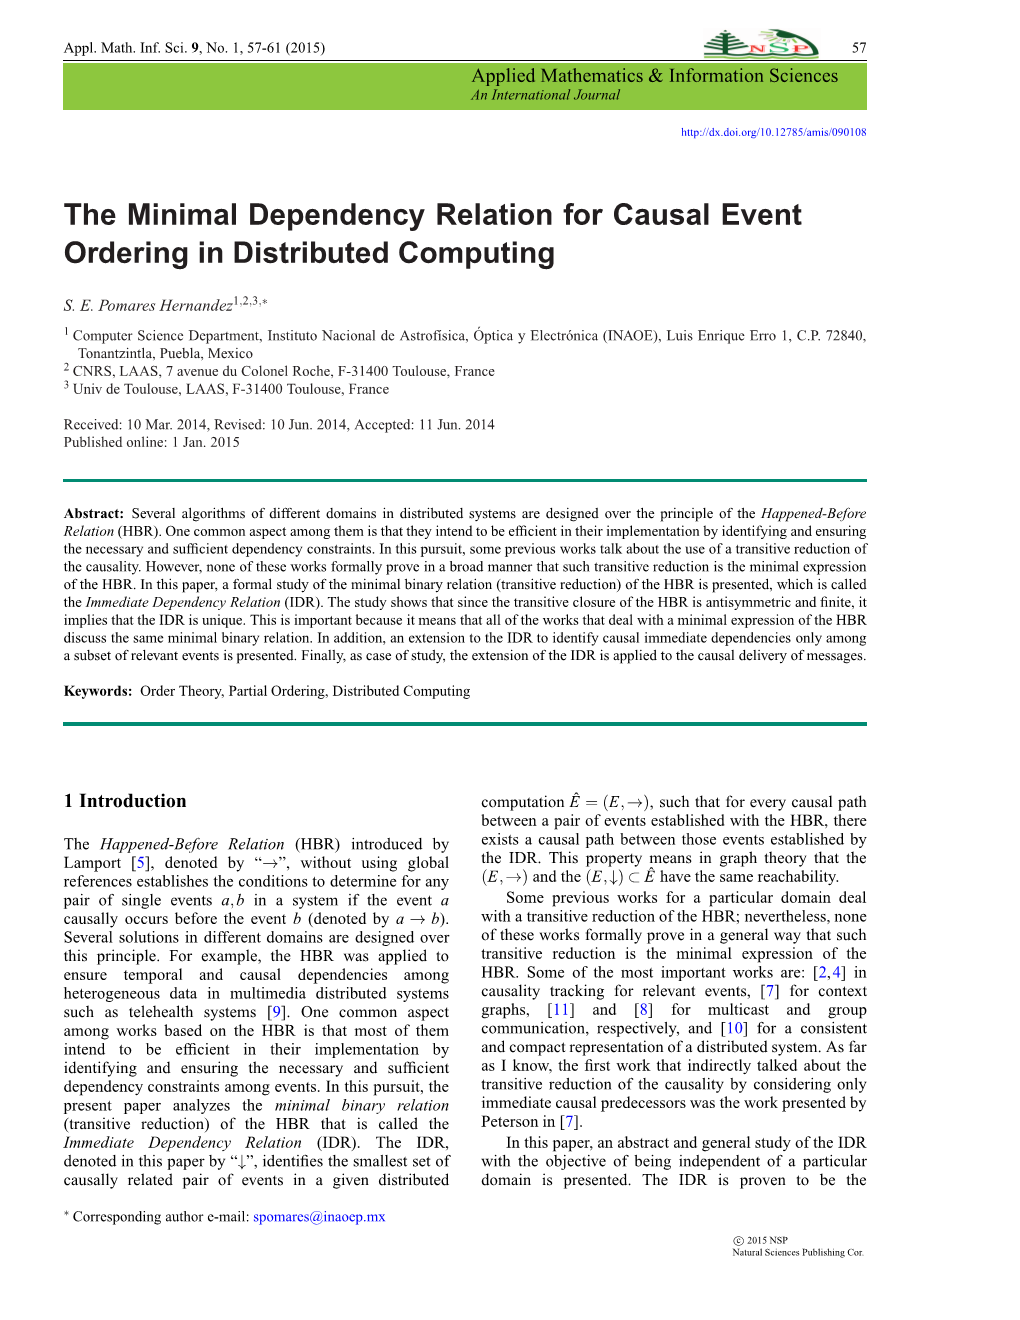 The Minimal Dependency Relation for Causal Event Ordering in Distributed Computing